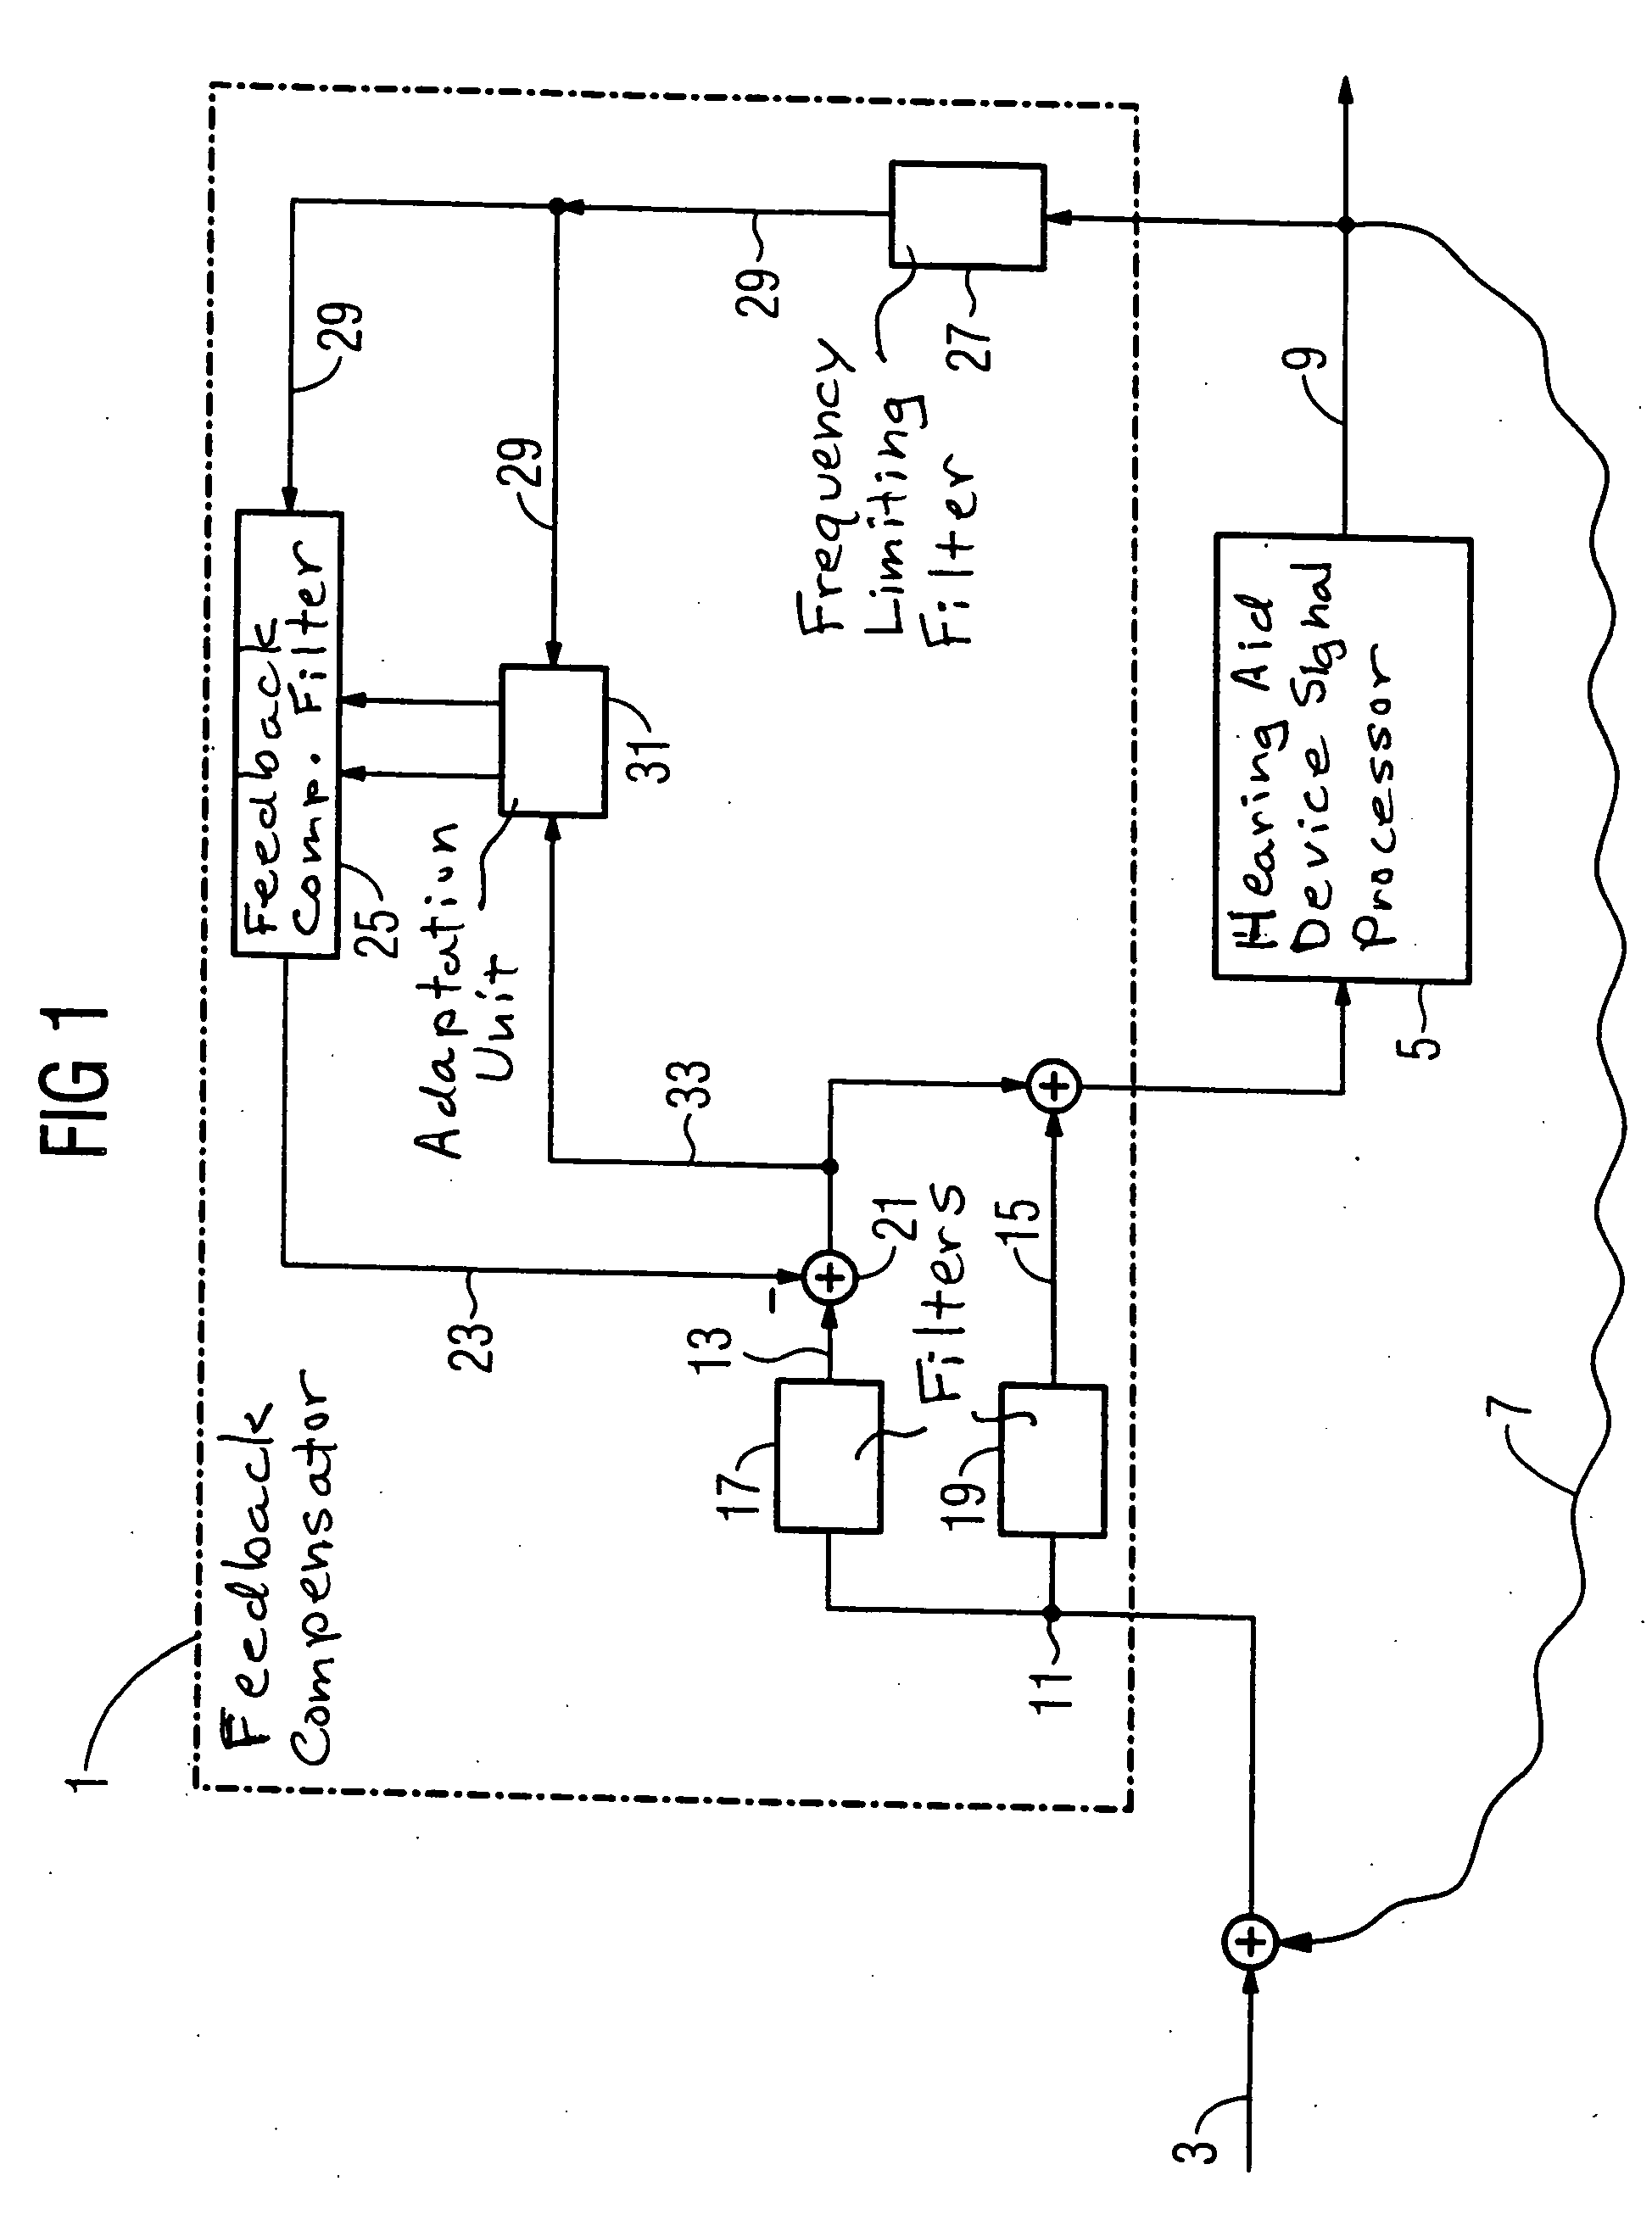 Feedback compensation device and method, and hearing aid device employing same